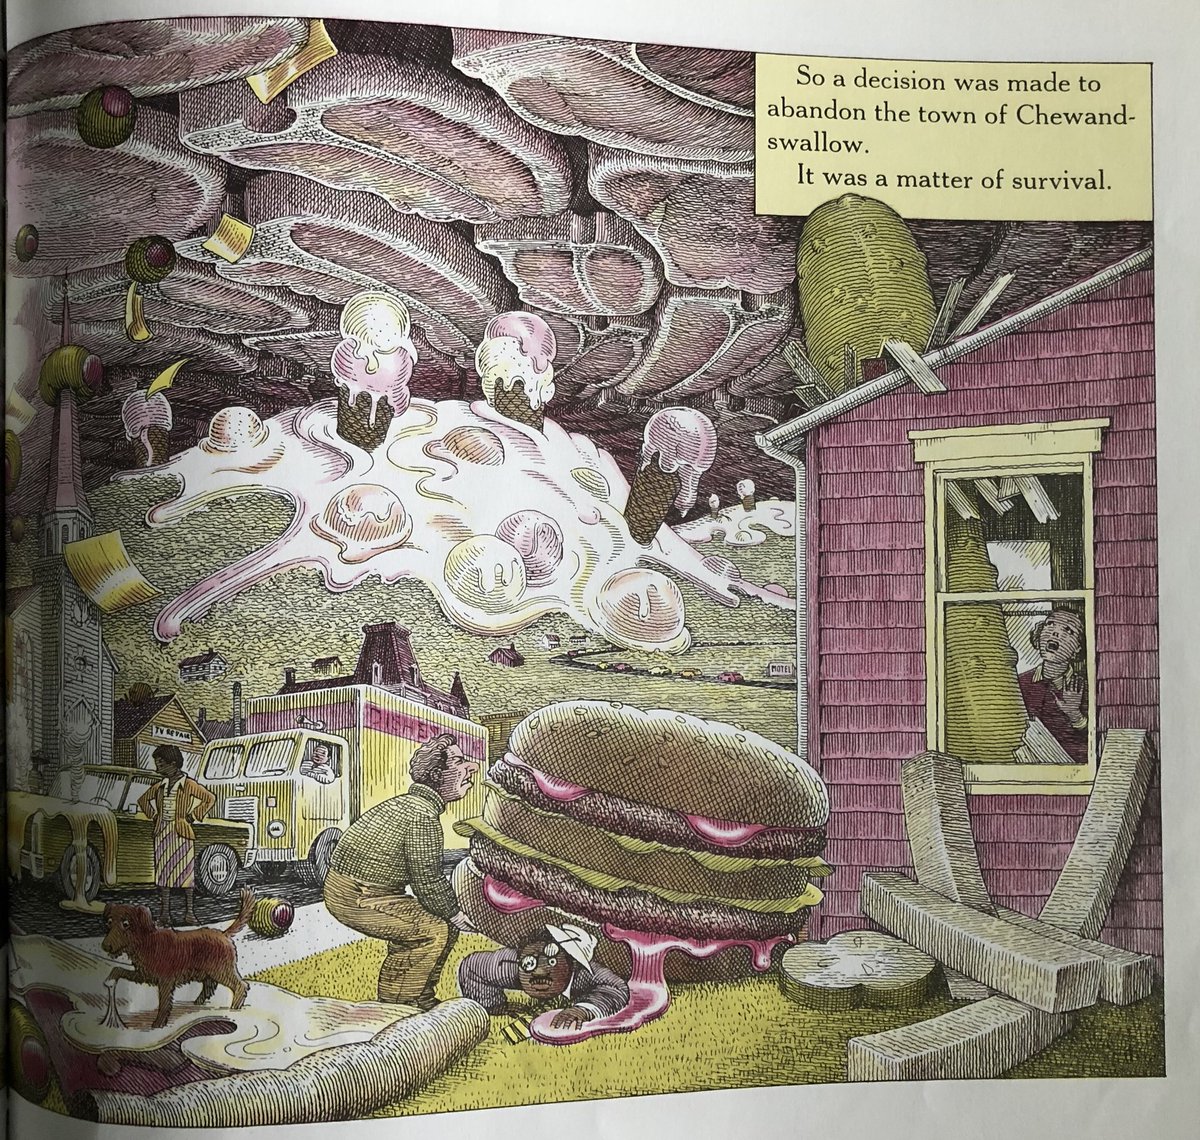 Passages from “Cloudy With a Chance of Meatballs” (1978) and headlines from the United States of America (2020), a thread: